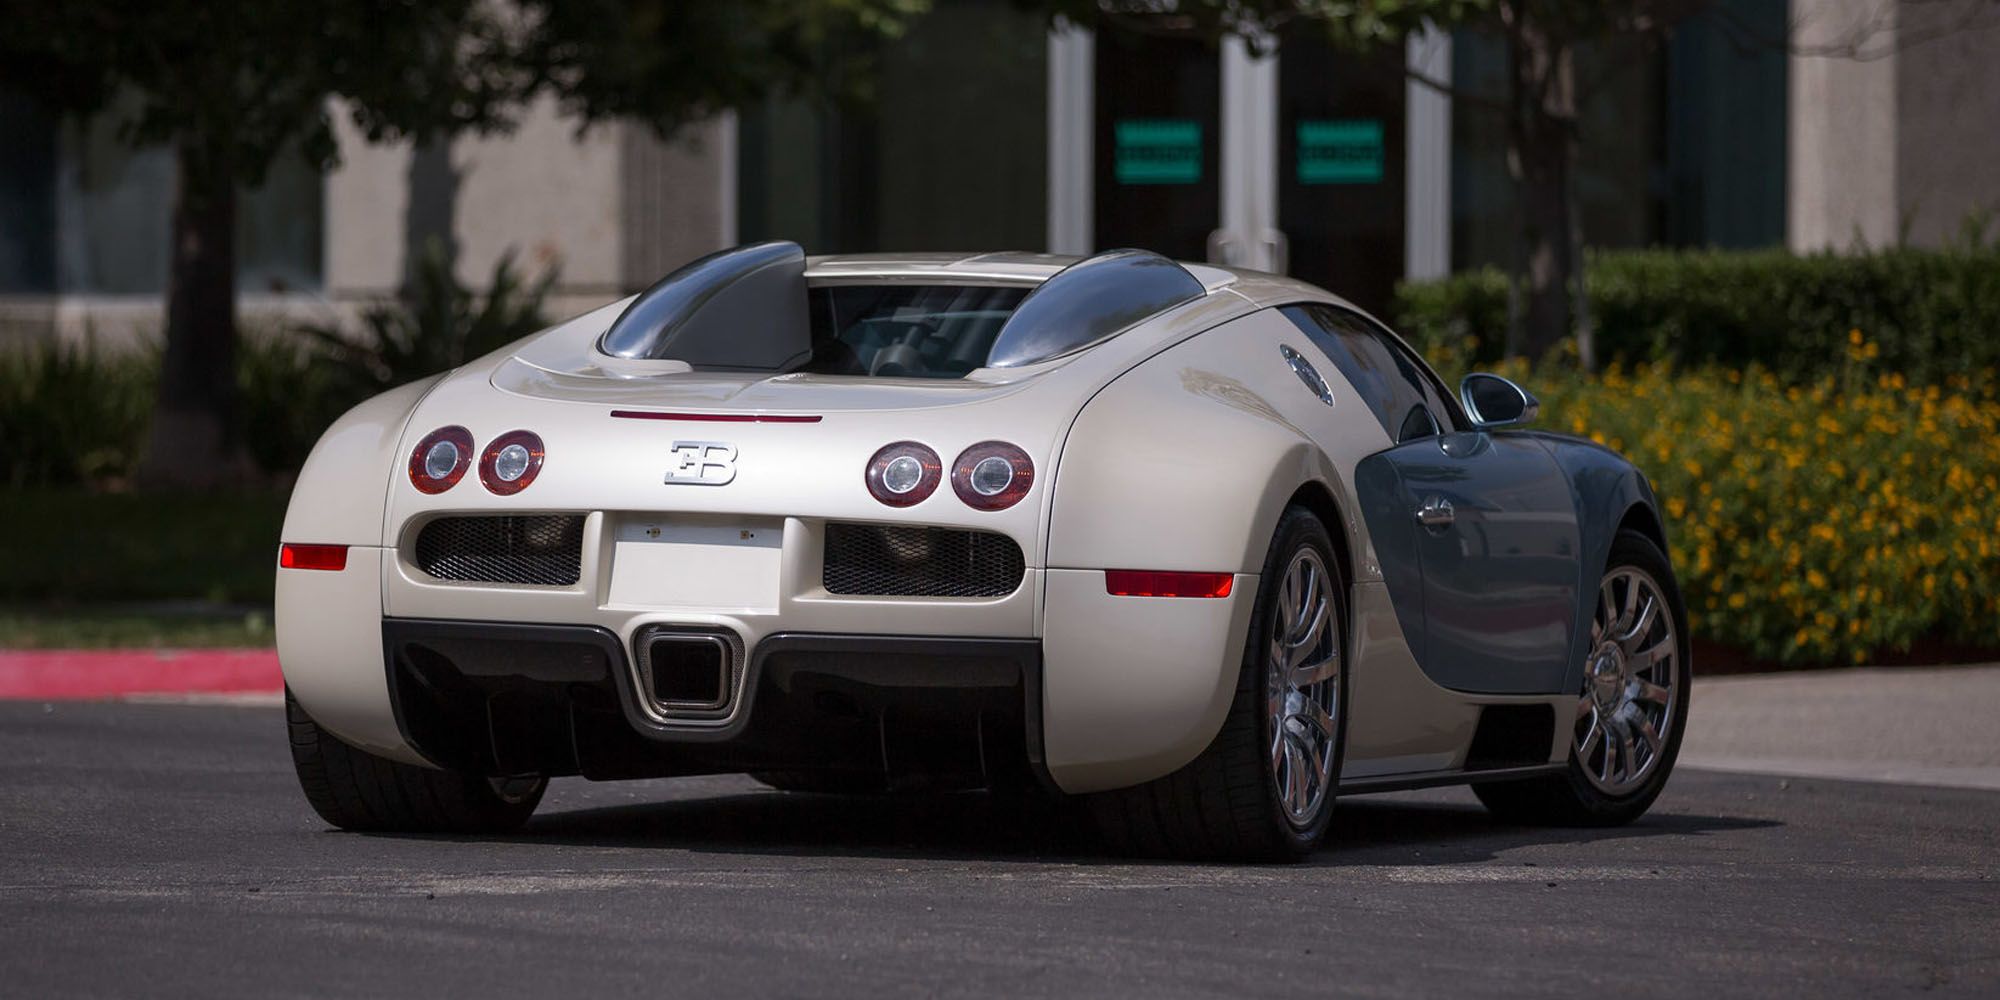 The rear of a two-tone gold and white Veyron